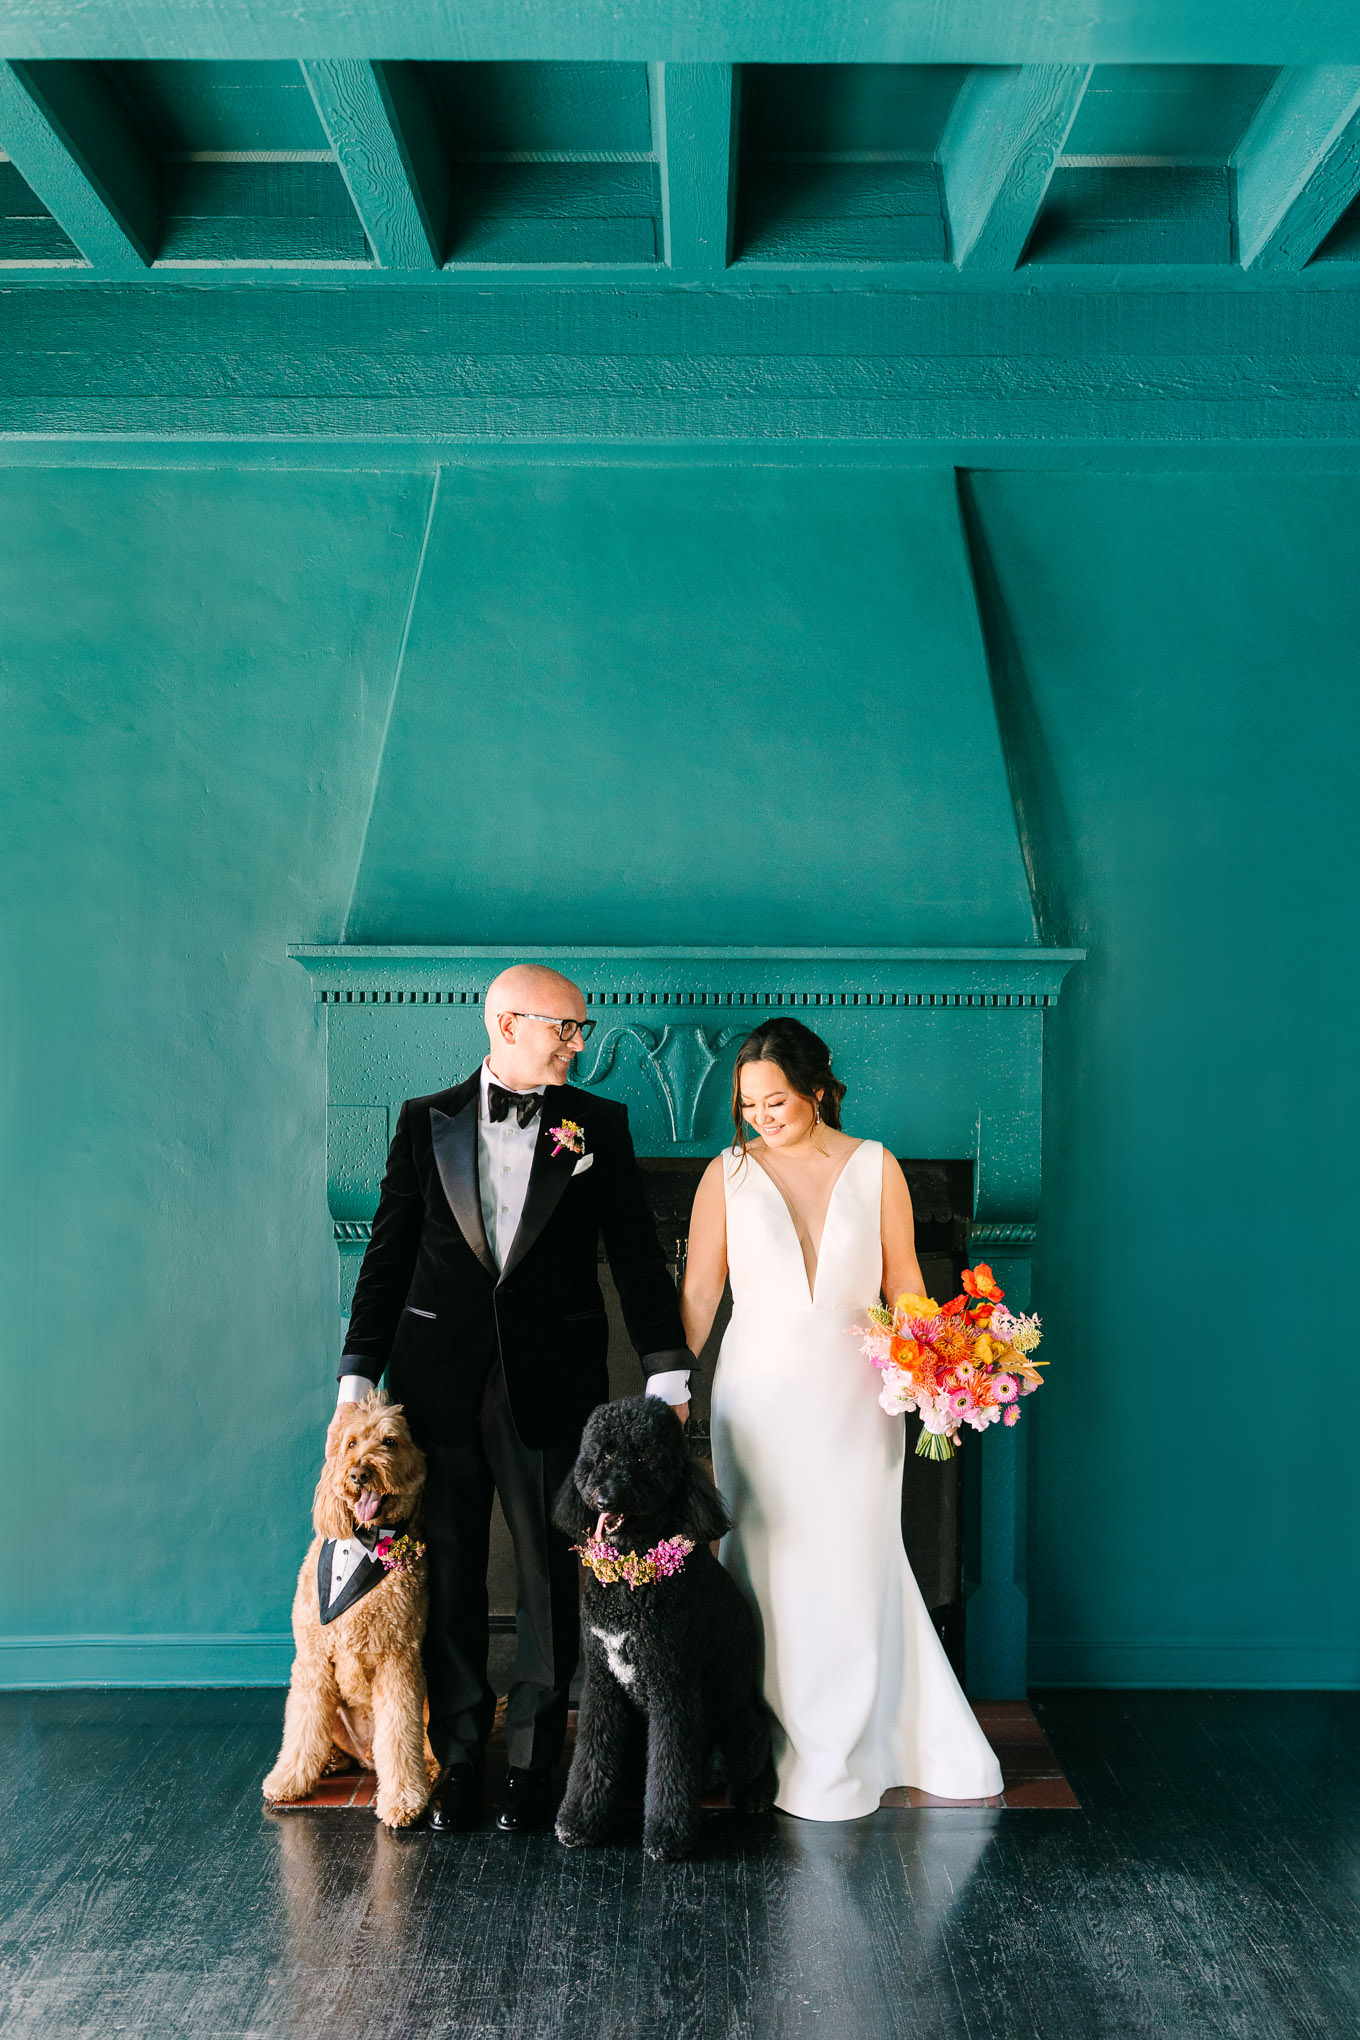 Downtown Los Angeles colorful Redbird wedding | Wedding and elopement photography roundup | Los Angeles and Palm Springs photographer | #losangeleswedding #palmspringswedding #elopementphotographer Source: Mary Costa Photography | Los Angeles